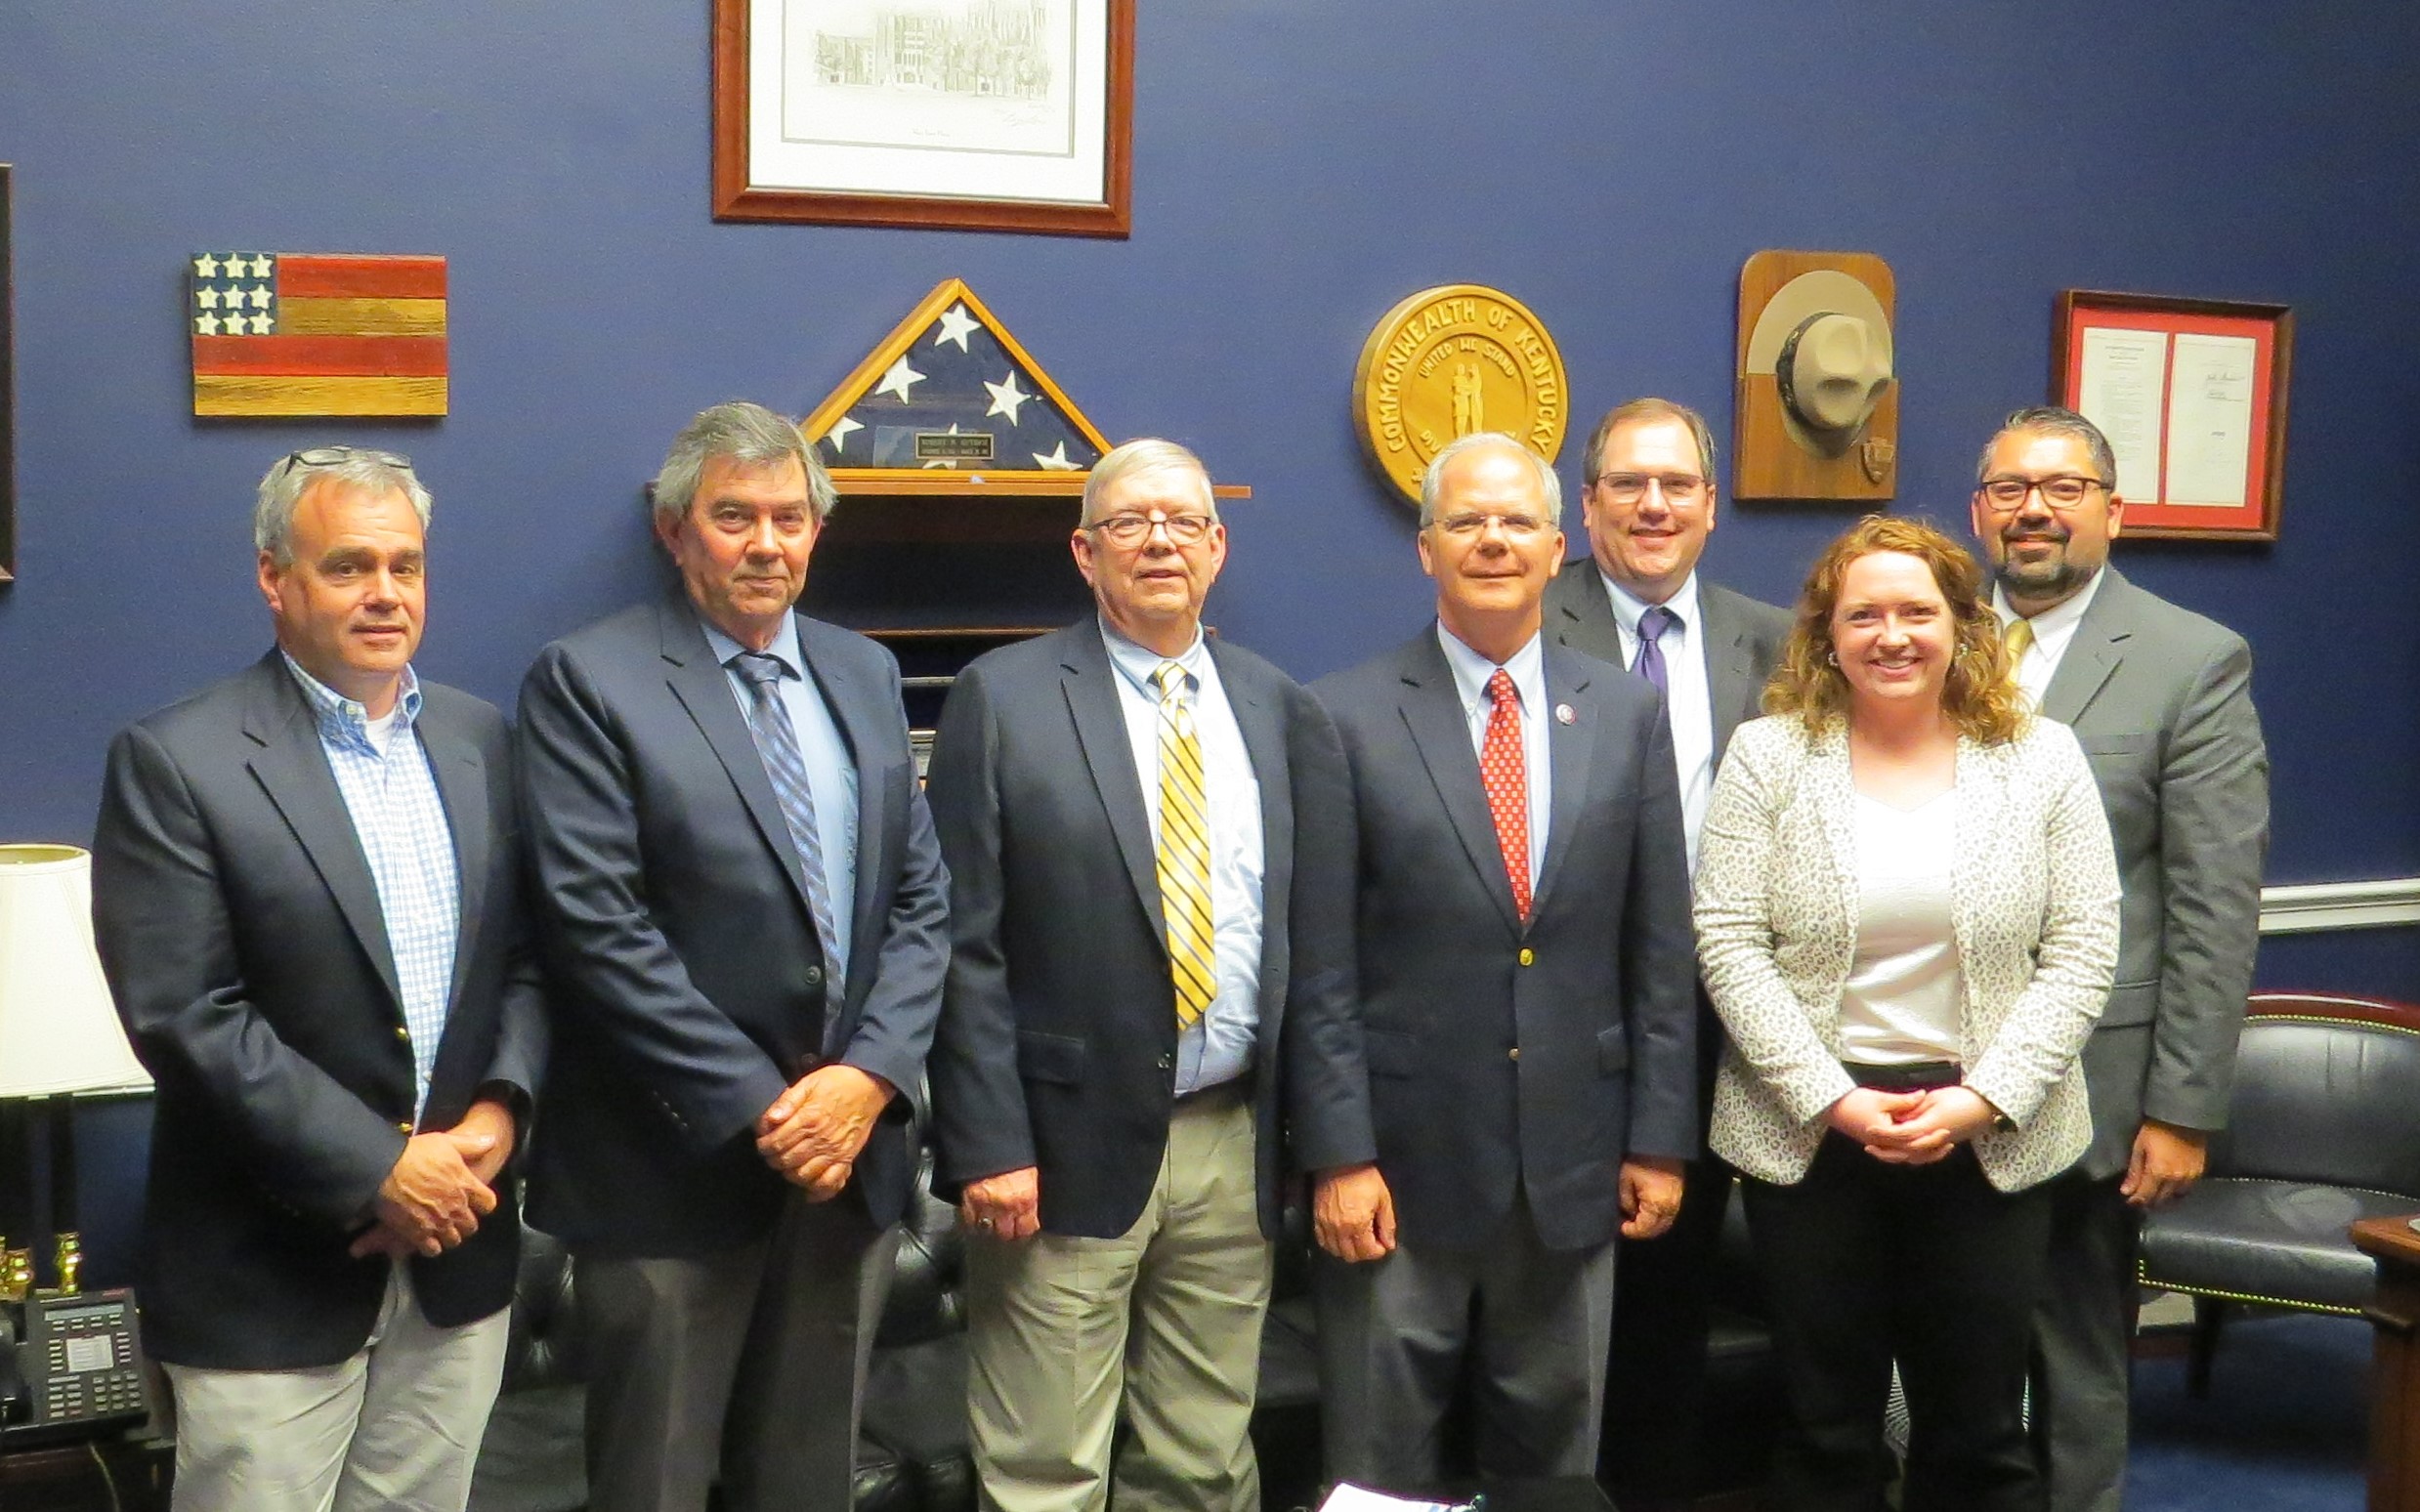 Rep. Guthrie meeting with the Kentucky Telecom Association to discuss broadband policy 